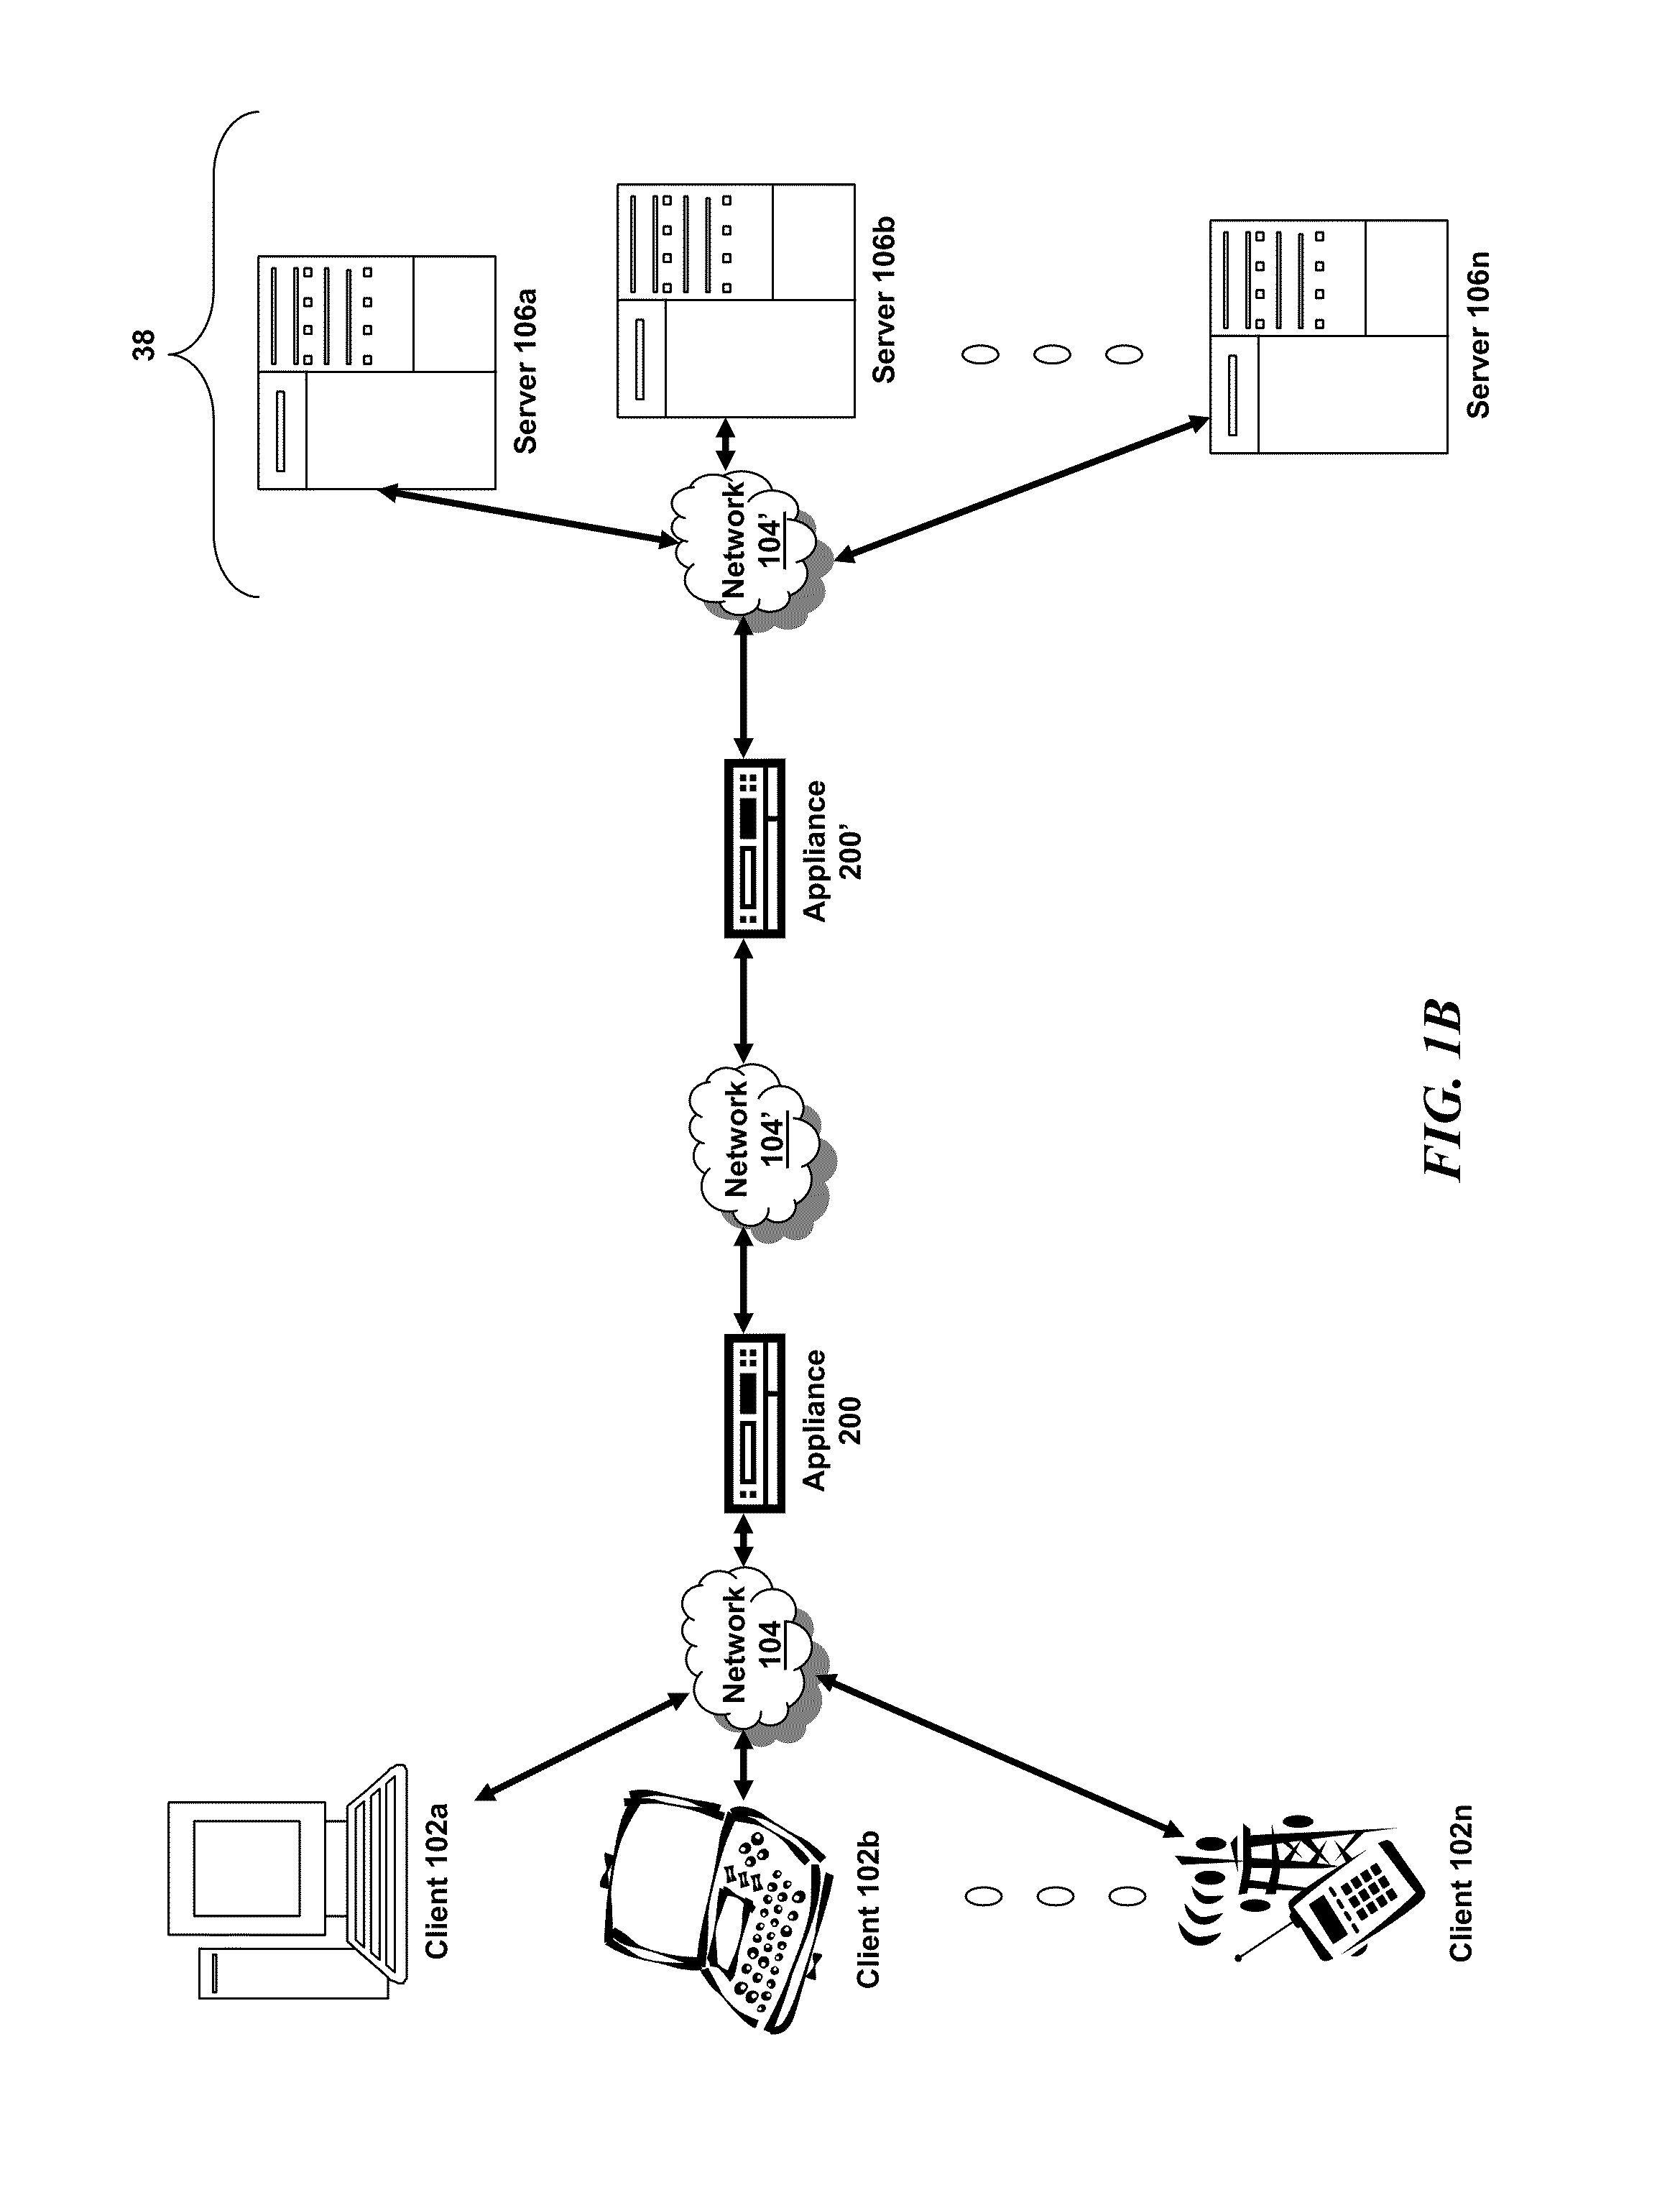 Systems and methods for trace filters by association of client to vserver to services